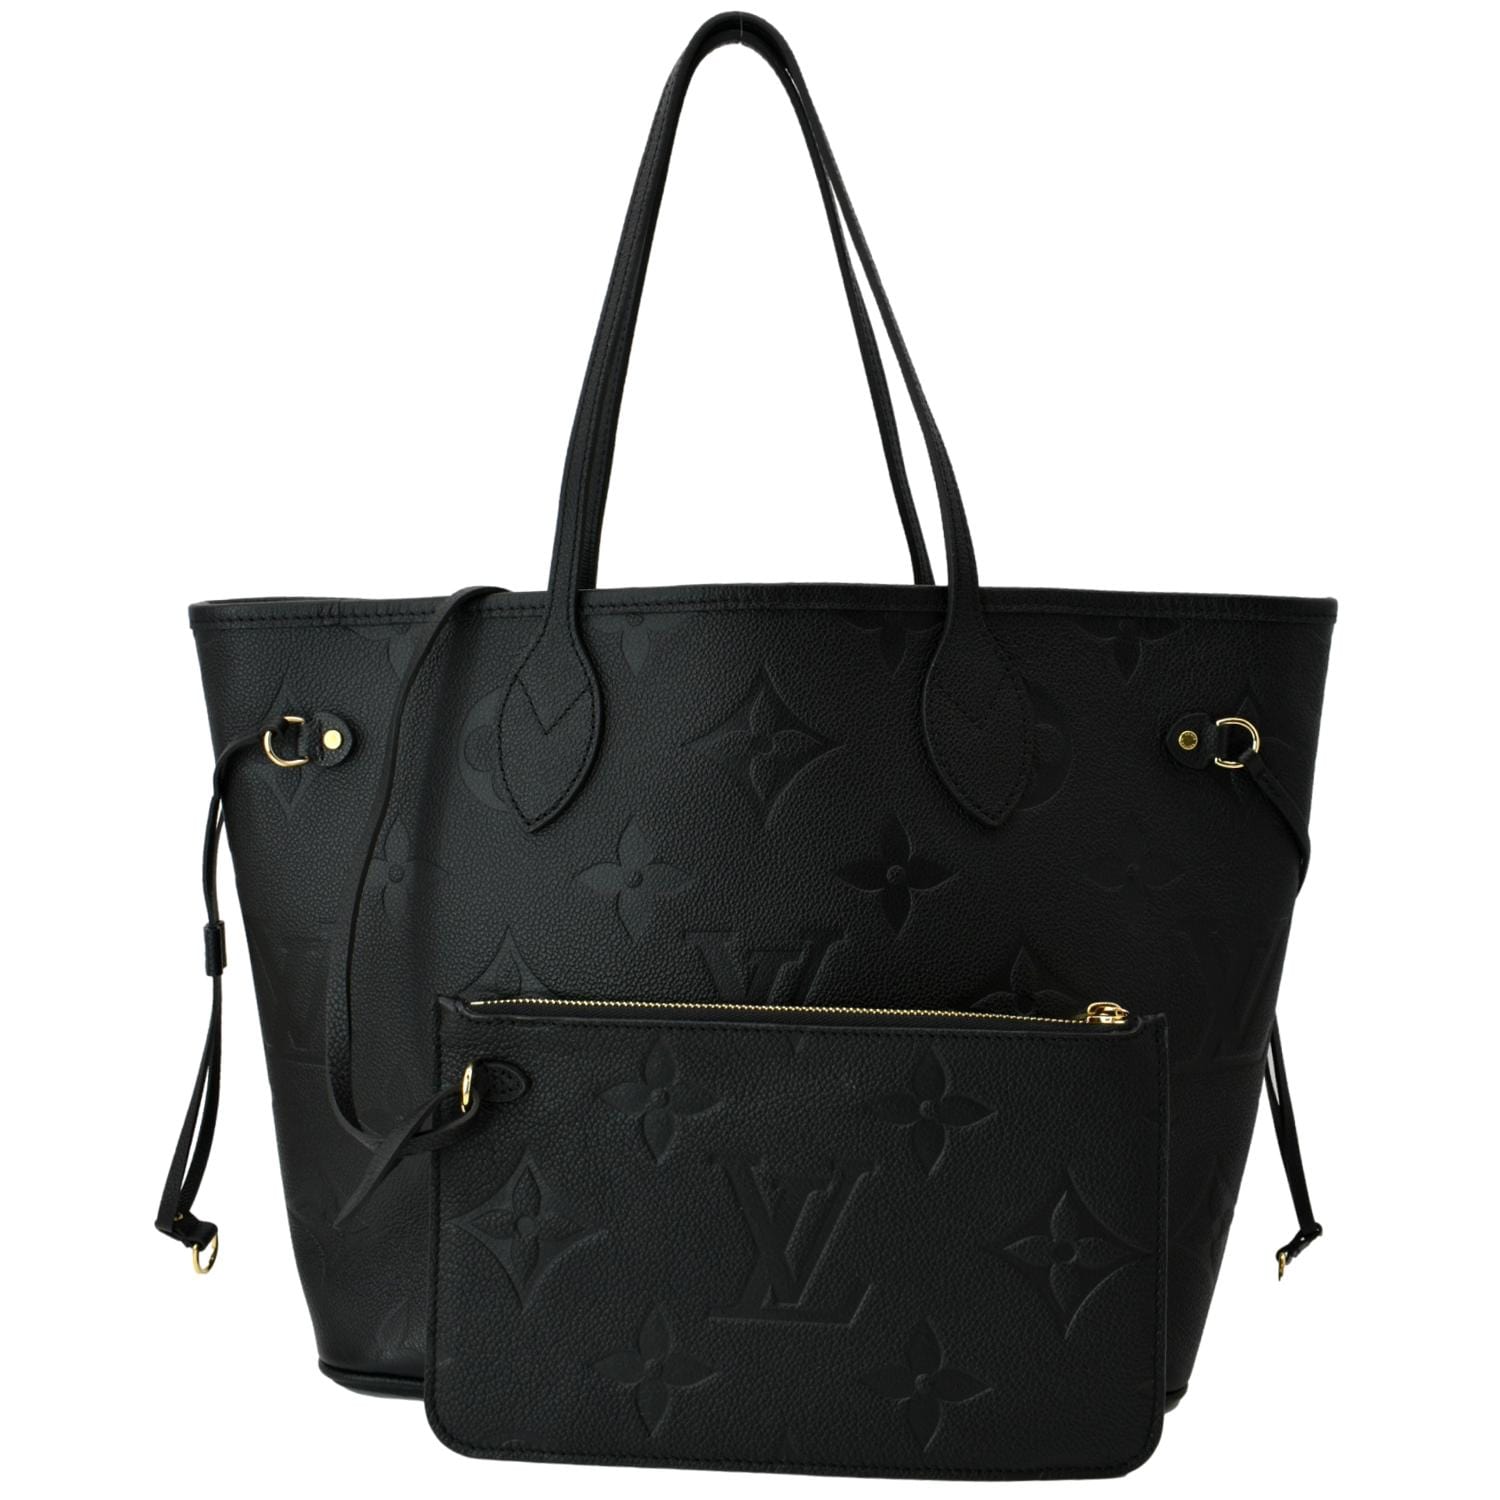 Louis Vuitton Neverfull MM Monogram Leather Tote Bag